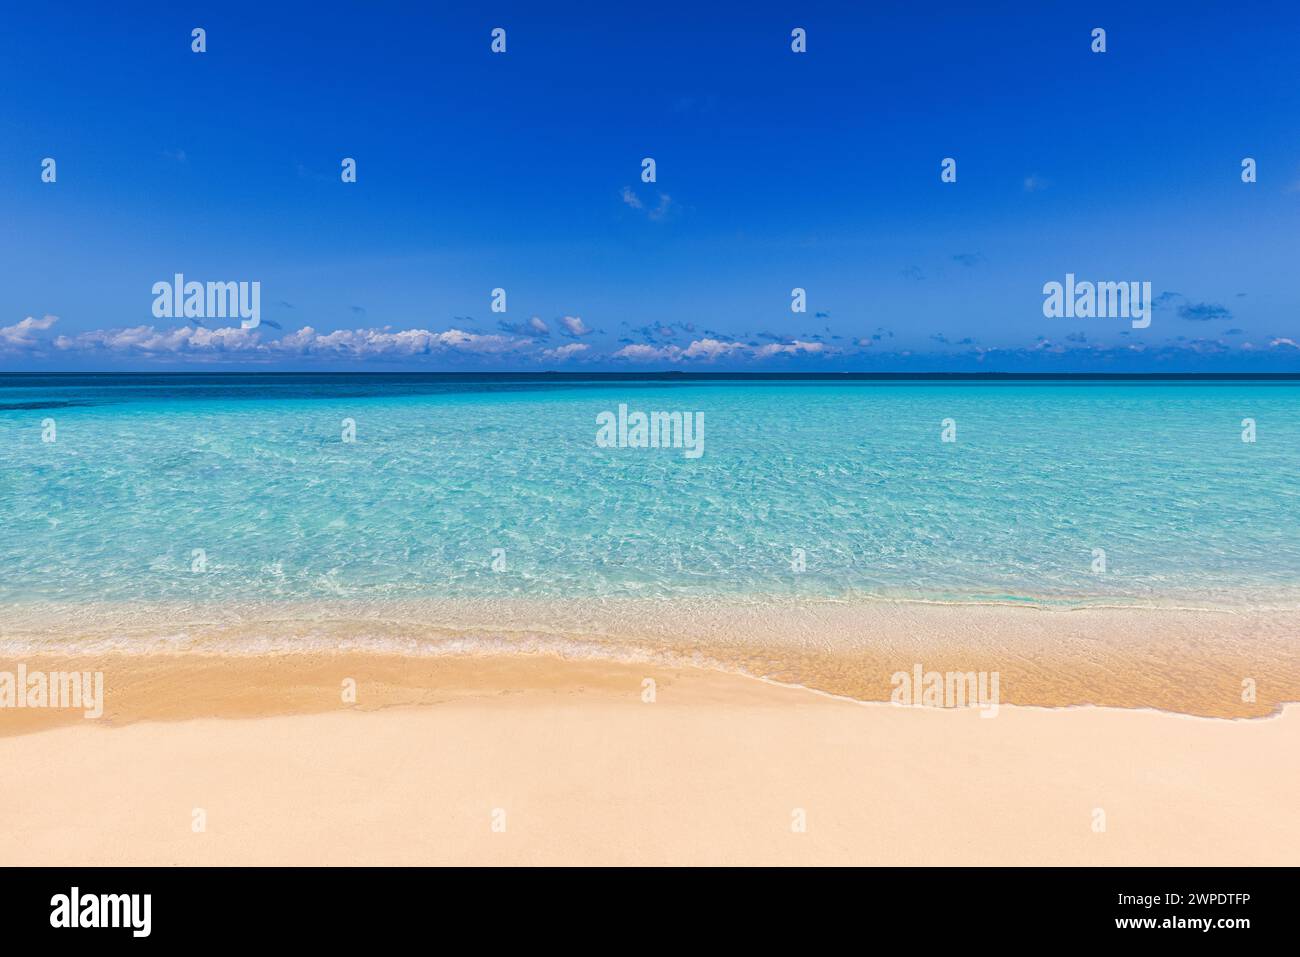 Tropical sunny beach view. Calm sunshine and relaxing empty beach scene, blue sky happy clouds and white sand. Tranquil nature shore coast landscape Stock Photo